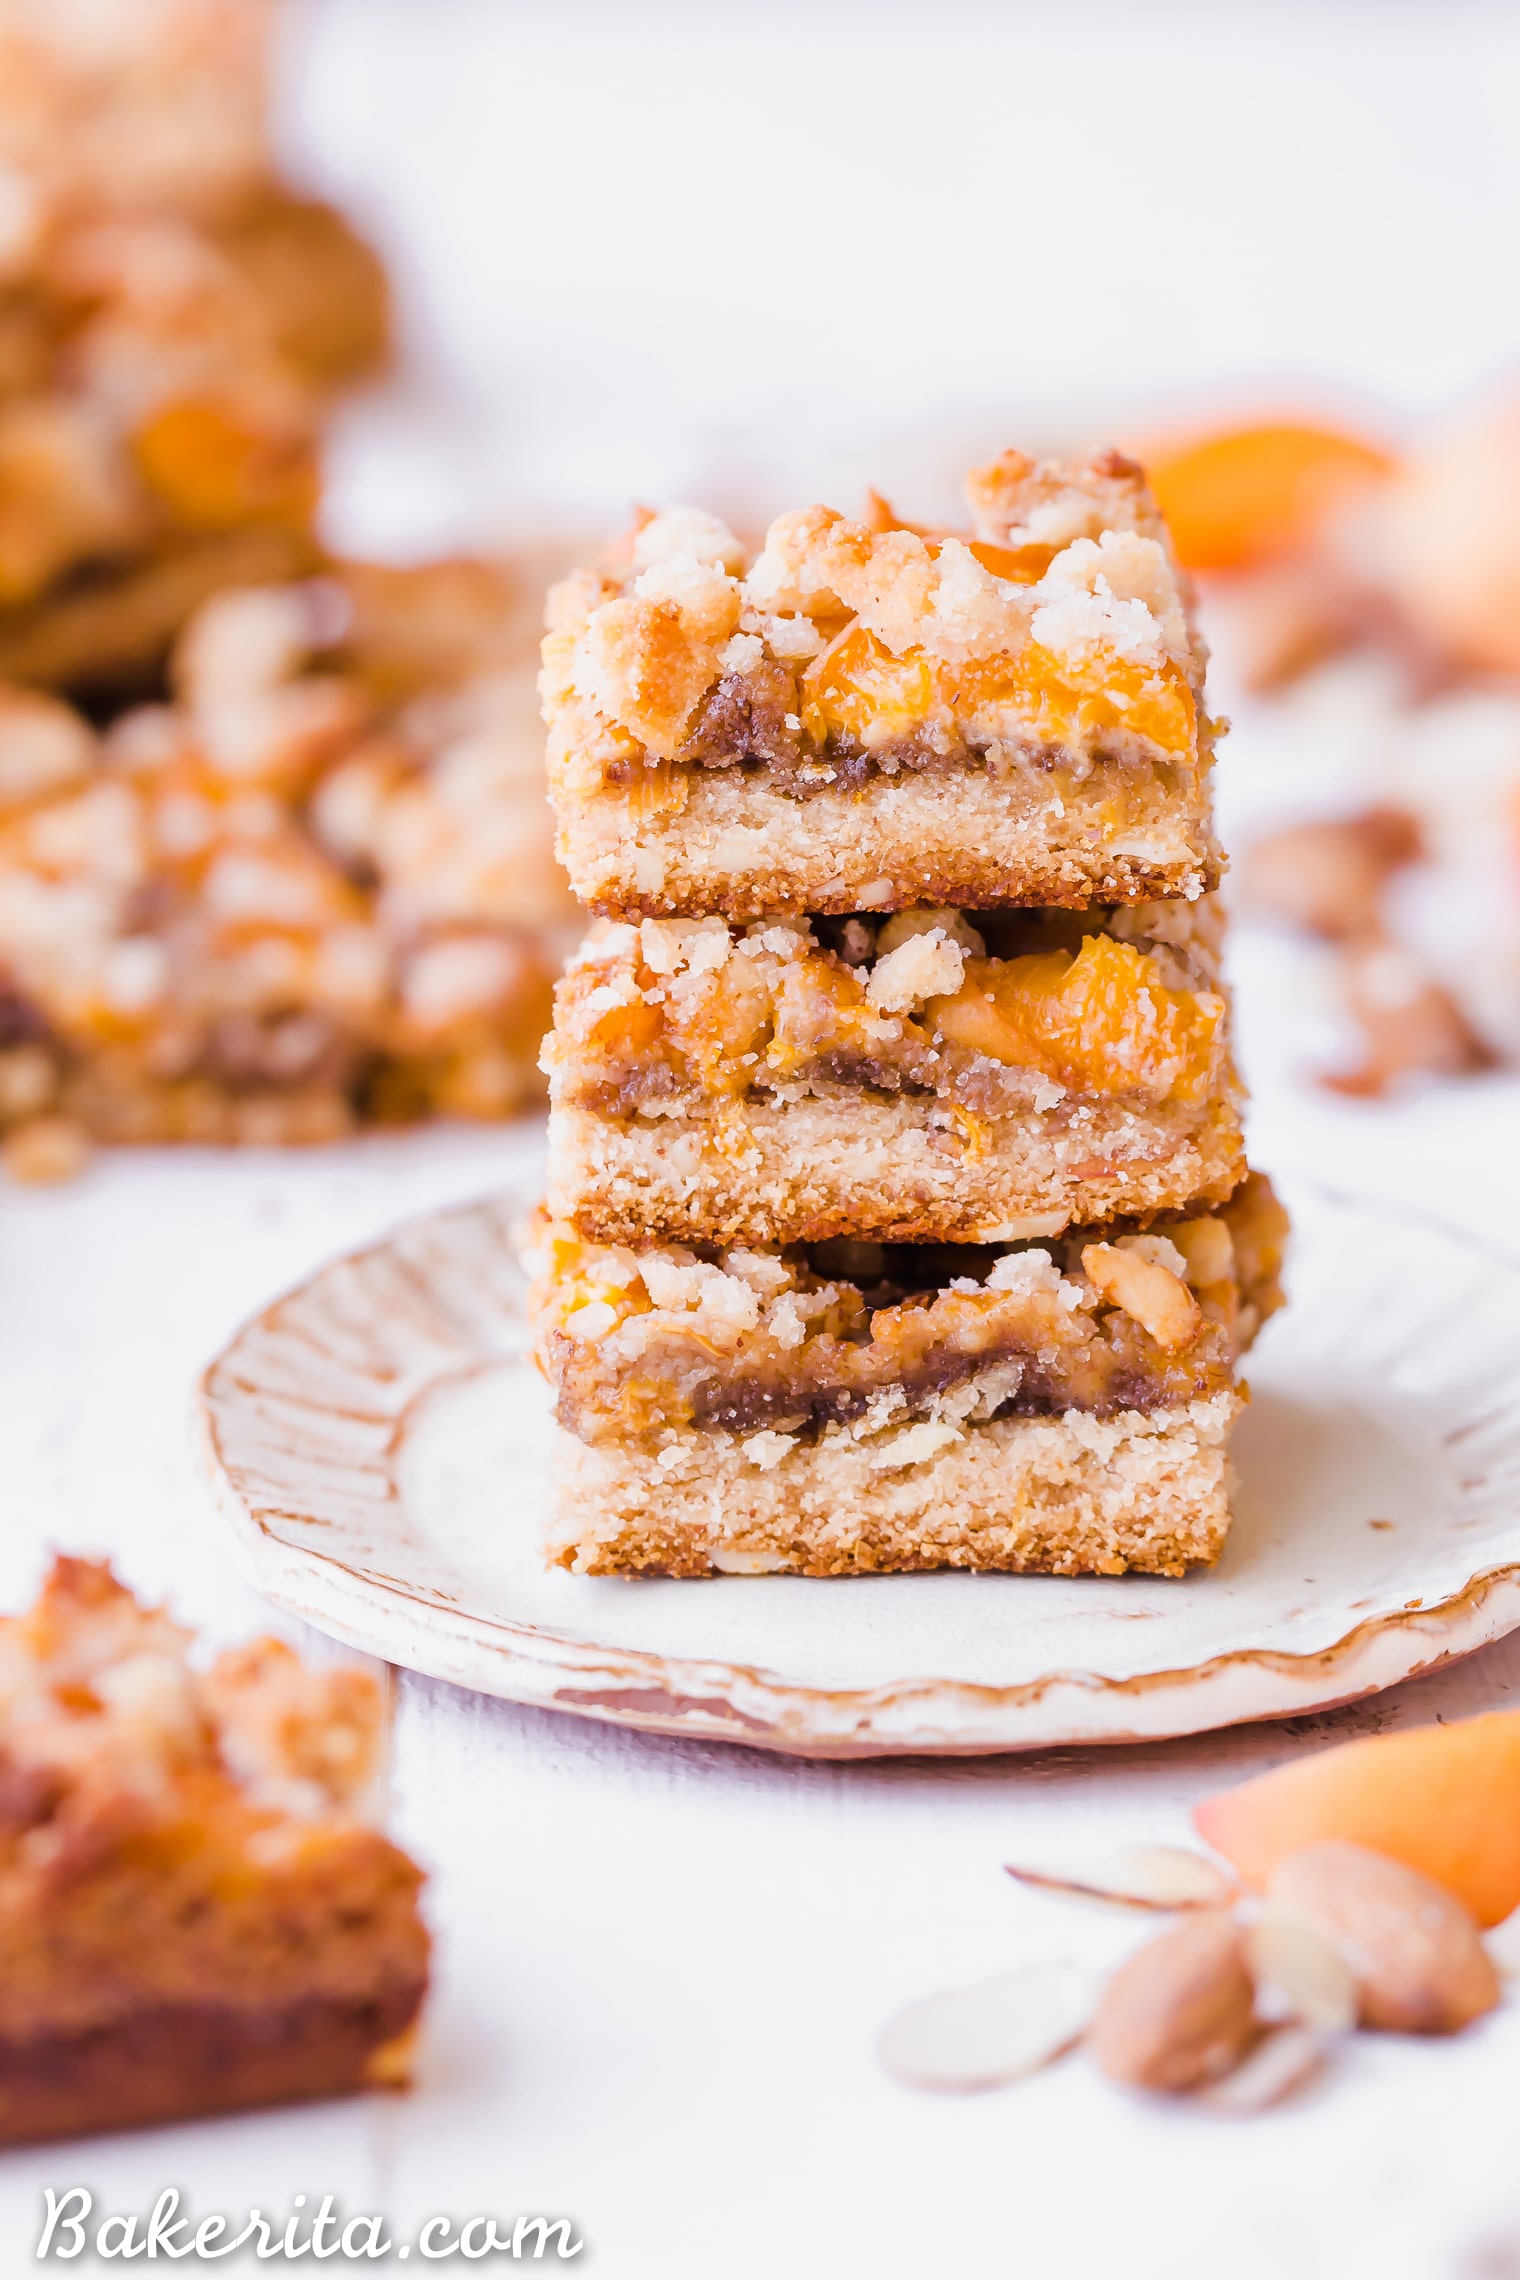 In these Apricot Frangipane Bars, apricots and almonds come together in the most delightful way - the shortbread crust is topped with an almond frangipane filling and topped with fresh, juicy apricots. These gluten-free, paleo, and vegan bars are irresistibly delicious. You can customize them with your favorite stone fruit, too!